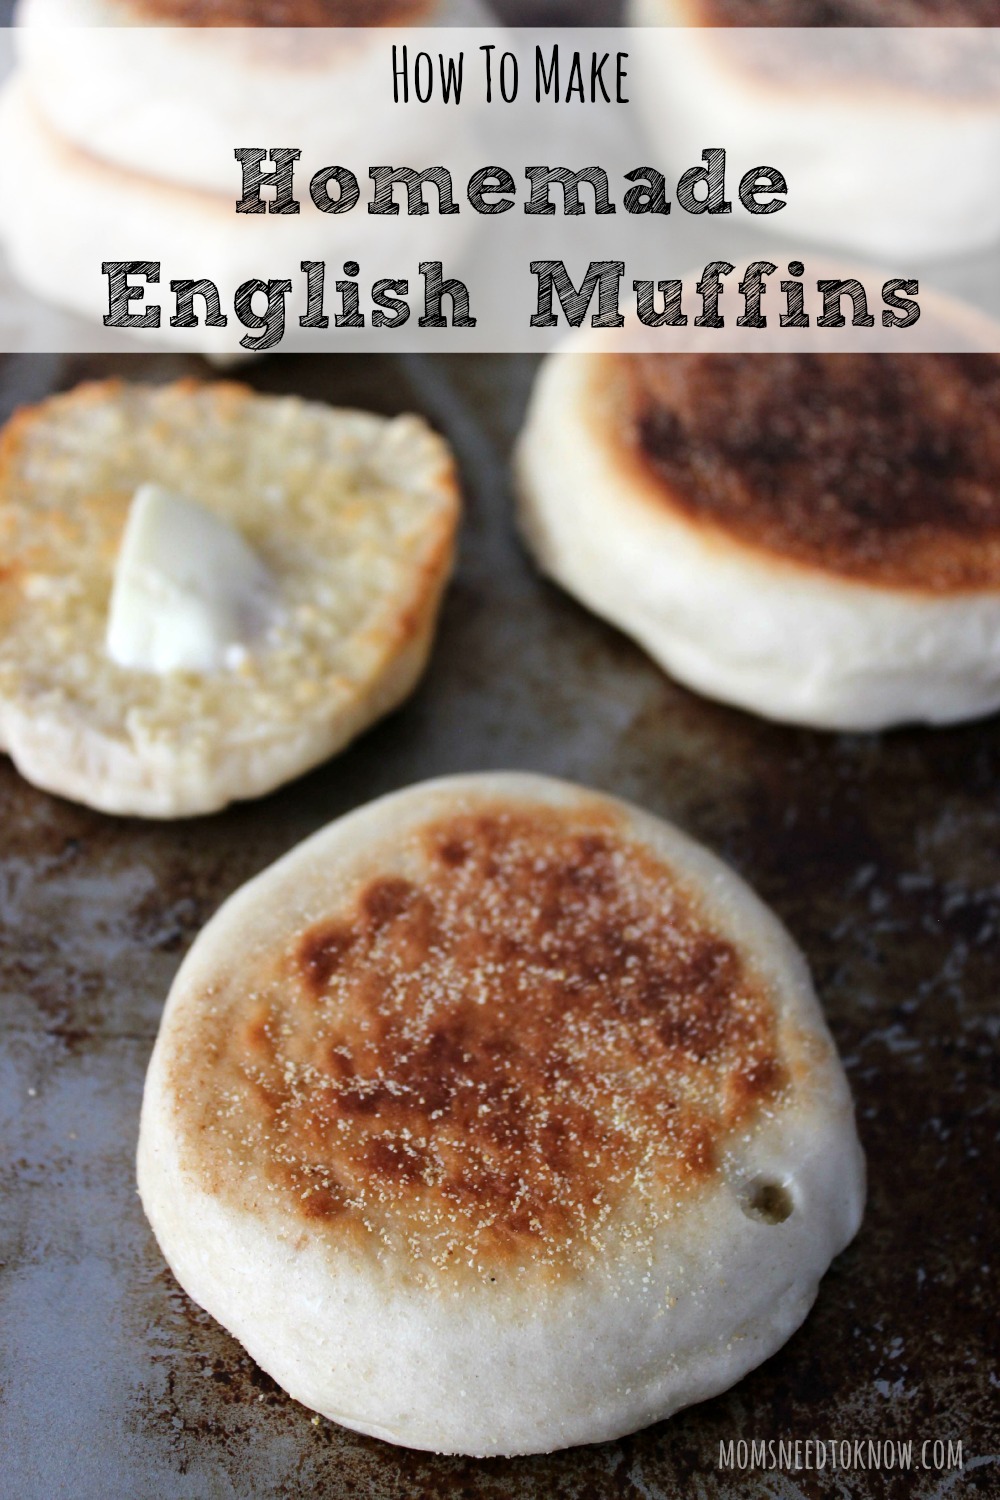 This English muffin recipe is so easy to make and will save you money over buying them pre-made. Best of all, you know exactly what is in them!